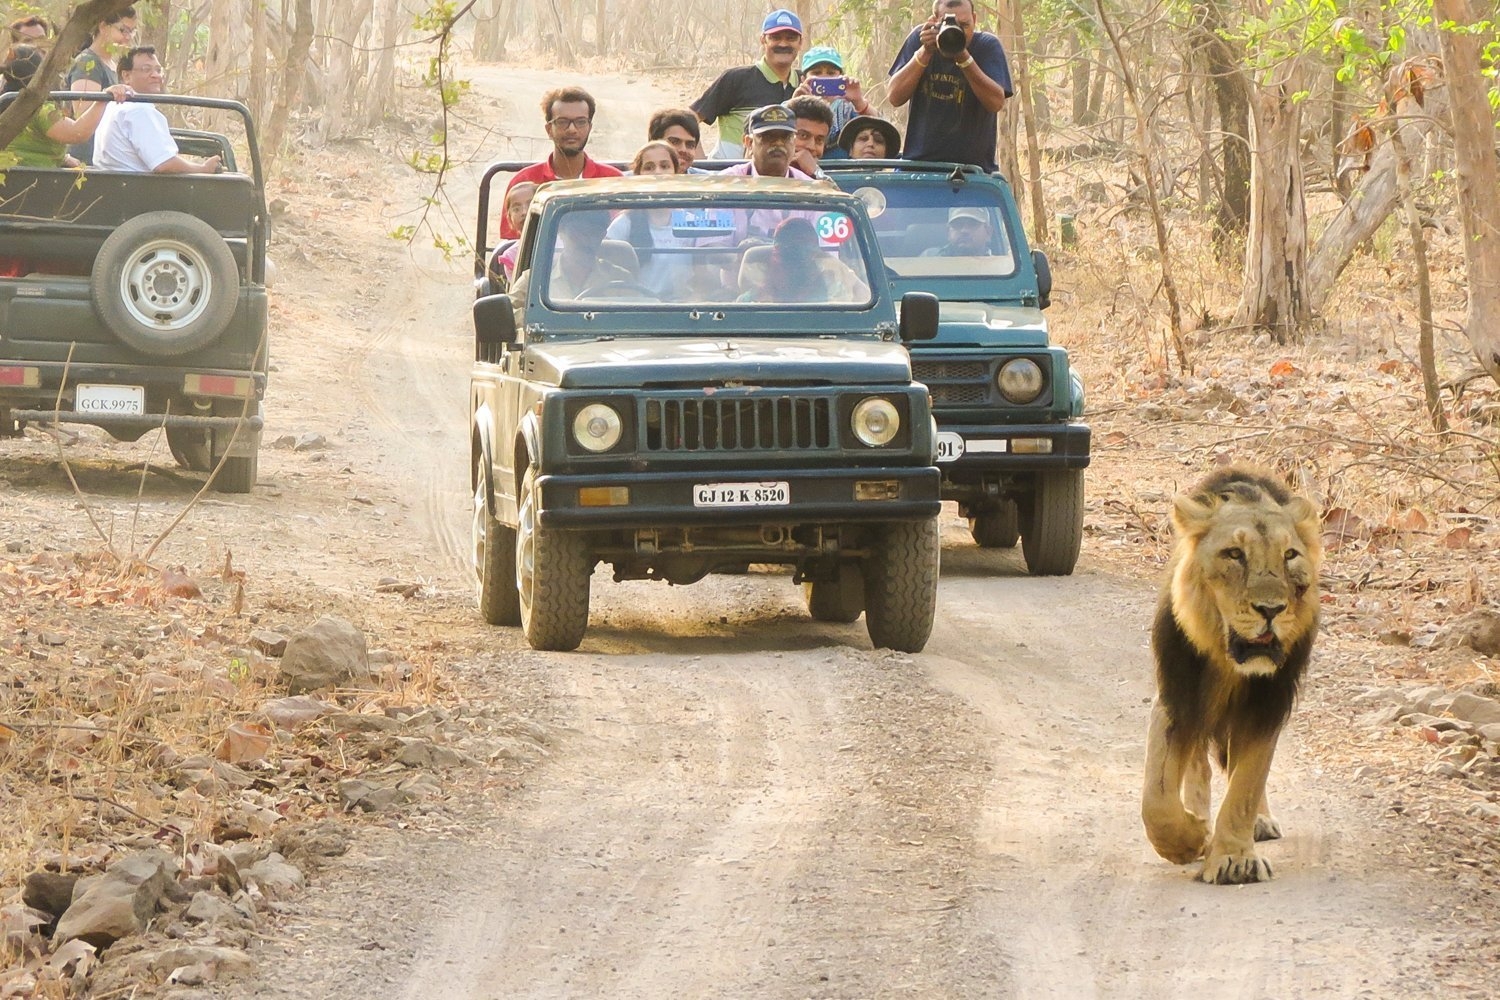 More Gypsy cars required for Gir jungle safari; Villagers from 17 nearby villages offered opporunity